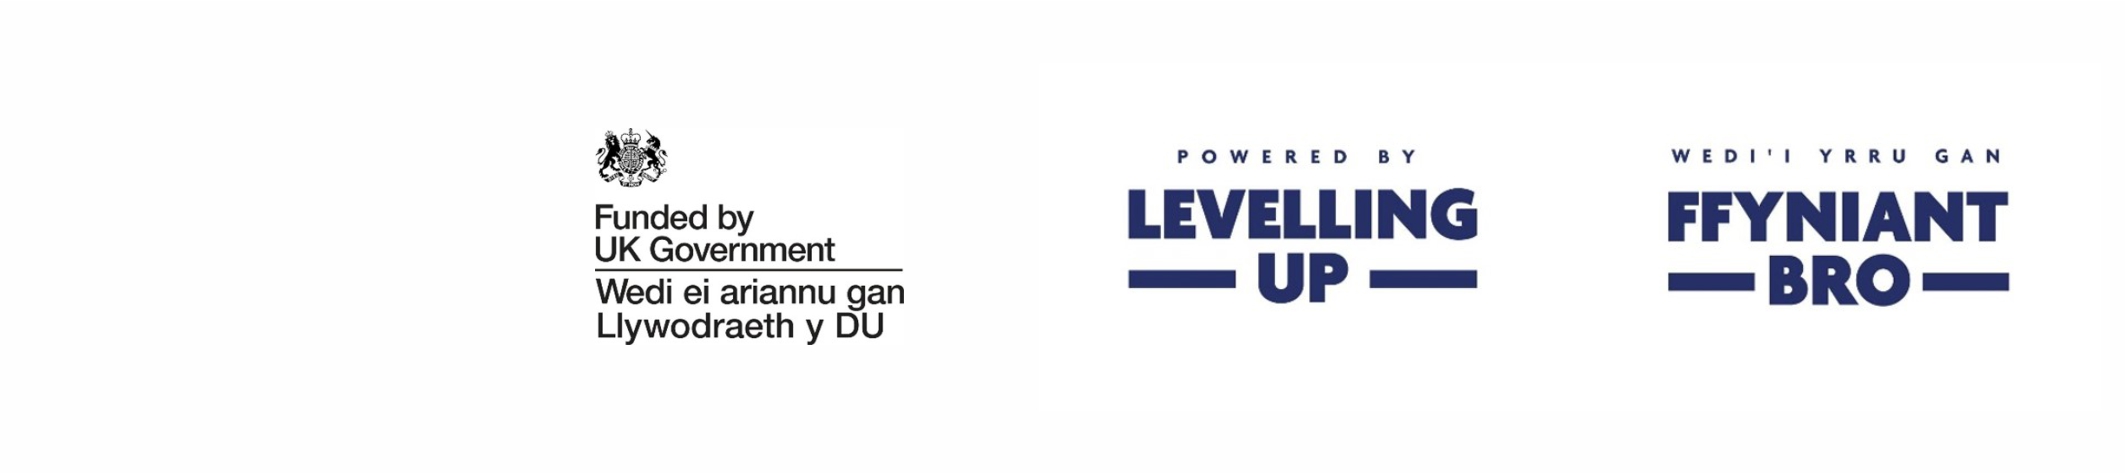 Funded by UK Government and Powered by Levelling Up logos